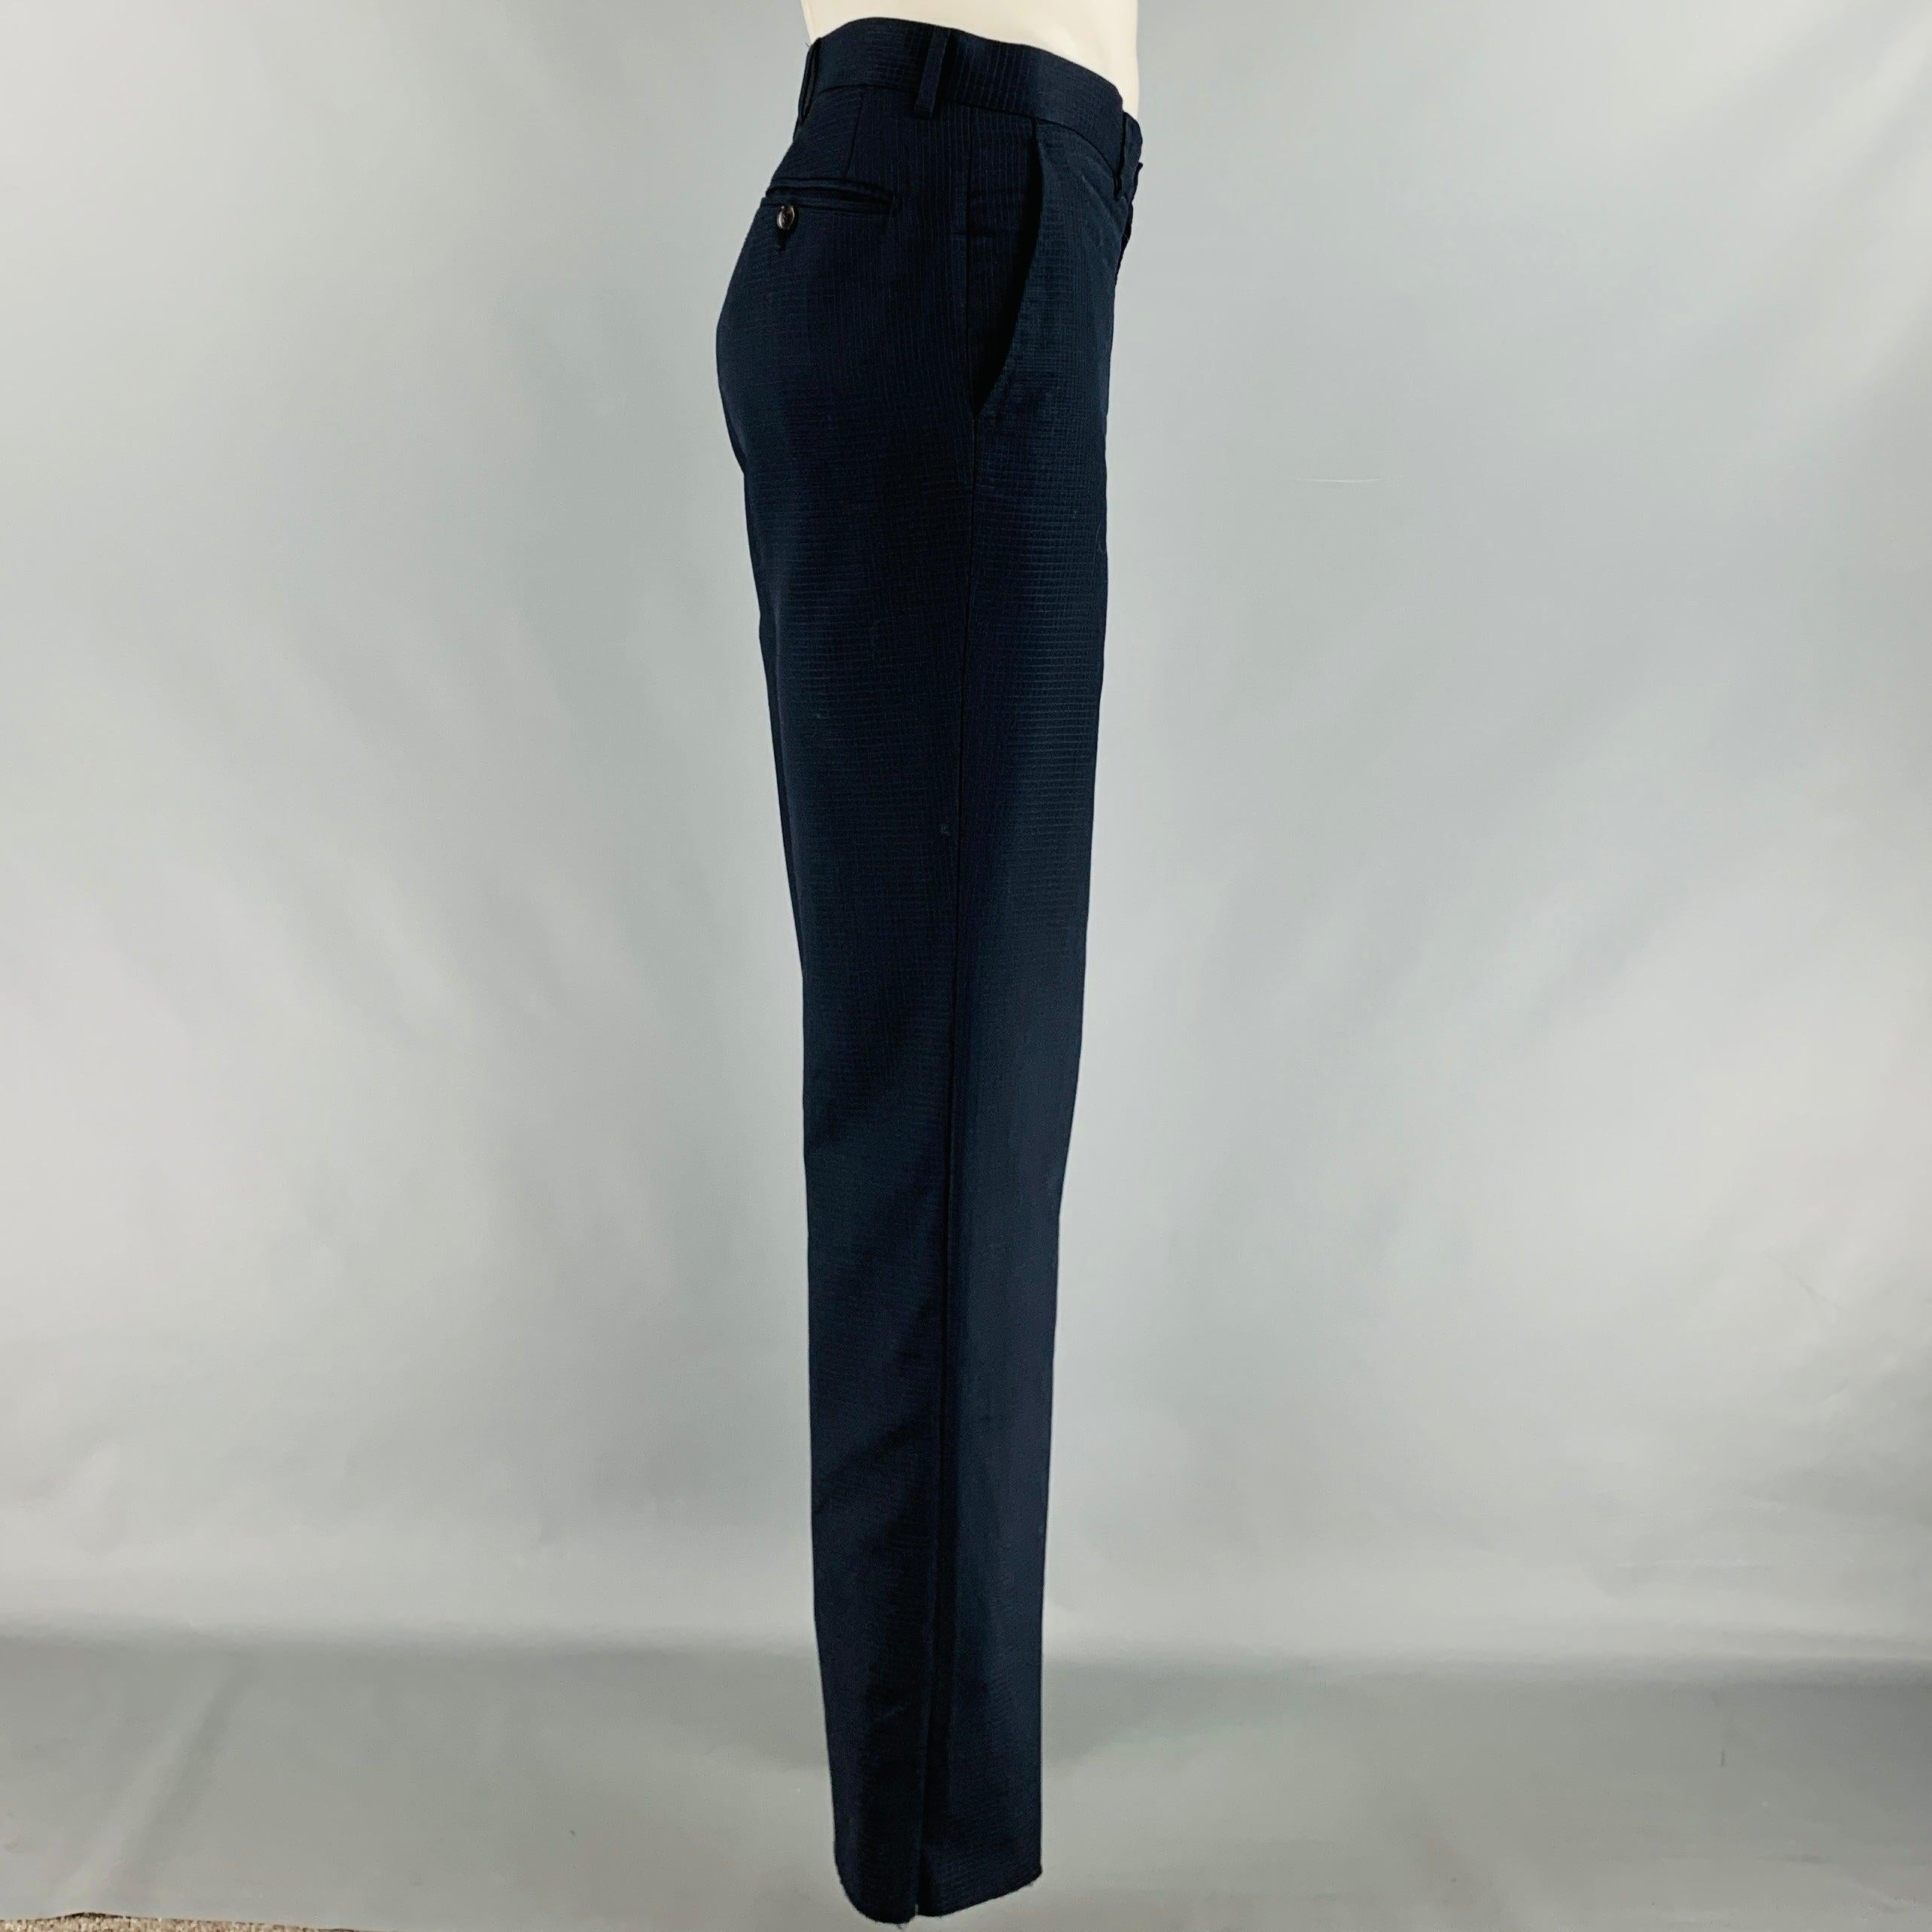 GUCCI casual pants in a navy wool fabric featuring flat front style, unfinished hem, and zip fly closure. Made in Italy.Very Good Pre-Owned Condition. Minor mark. 

Marked:   IT 50 

Measurements: 
  Waist: 34 inches Rise: 8 inches Inseam: 36 inches